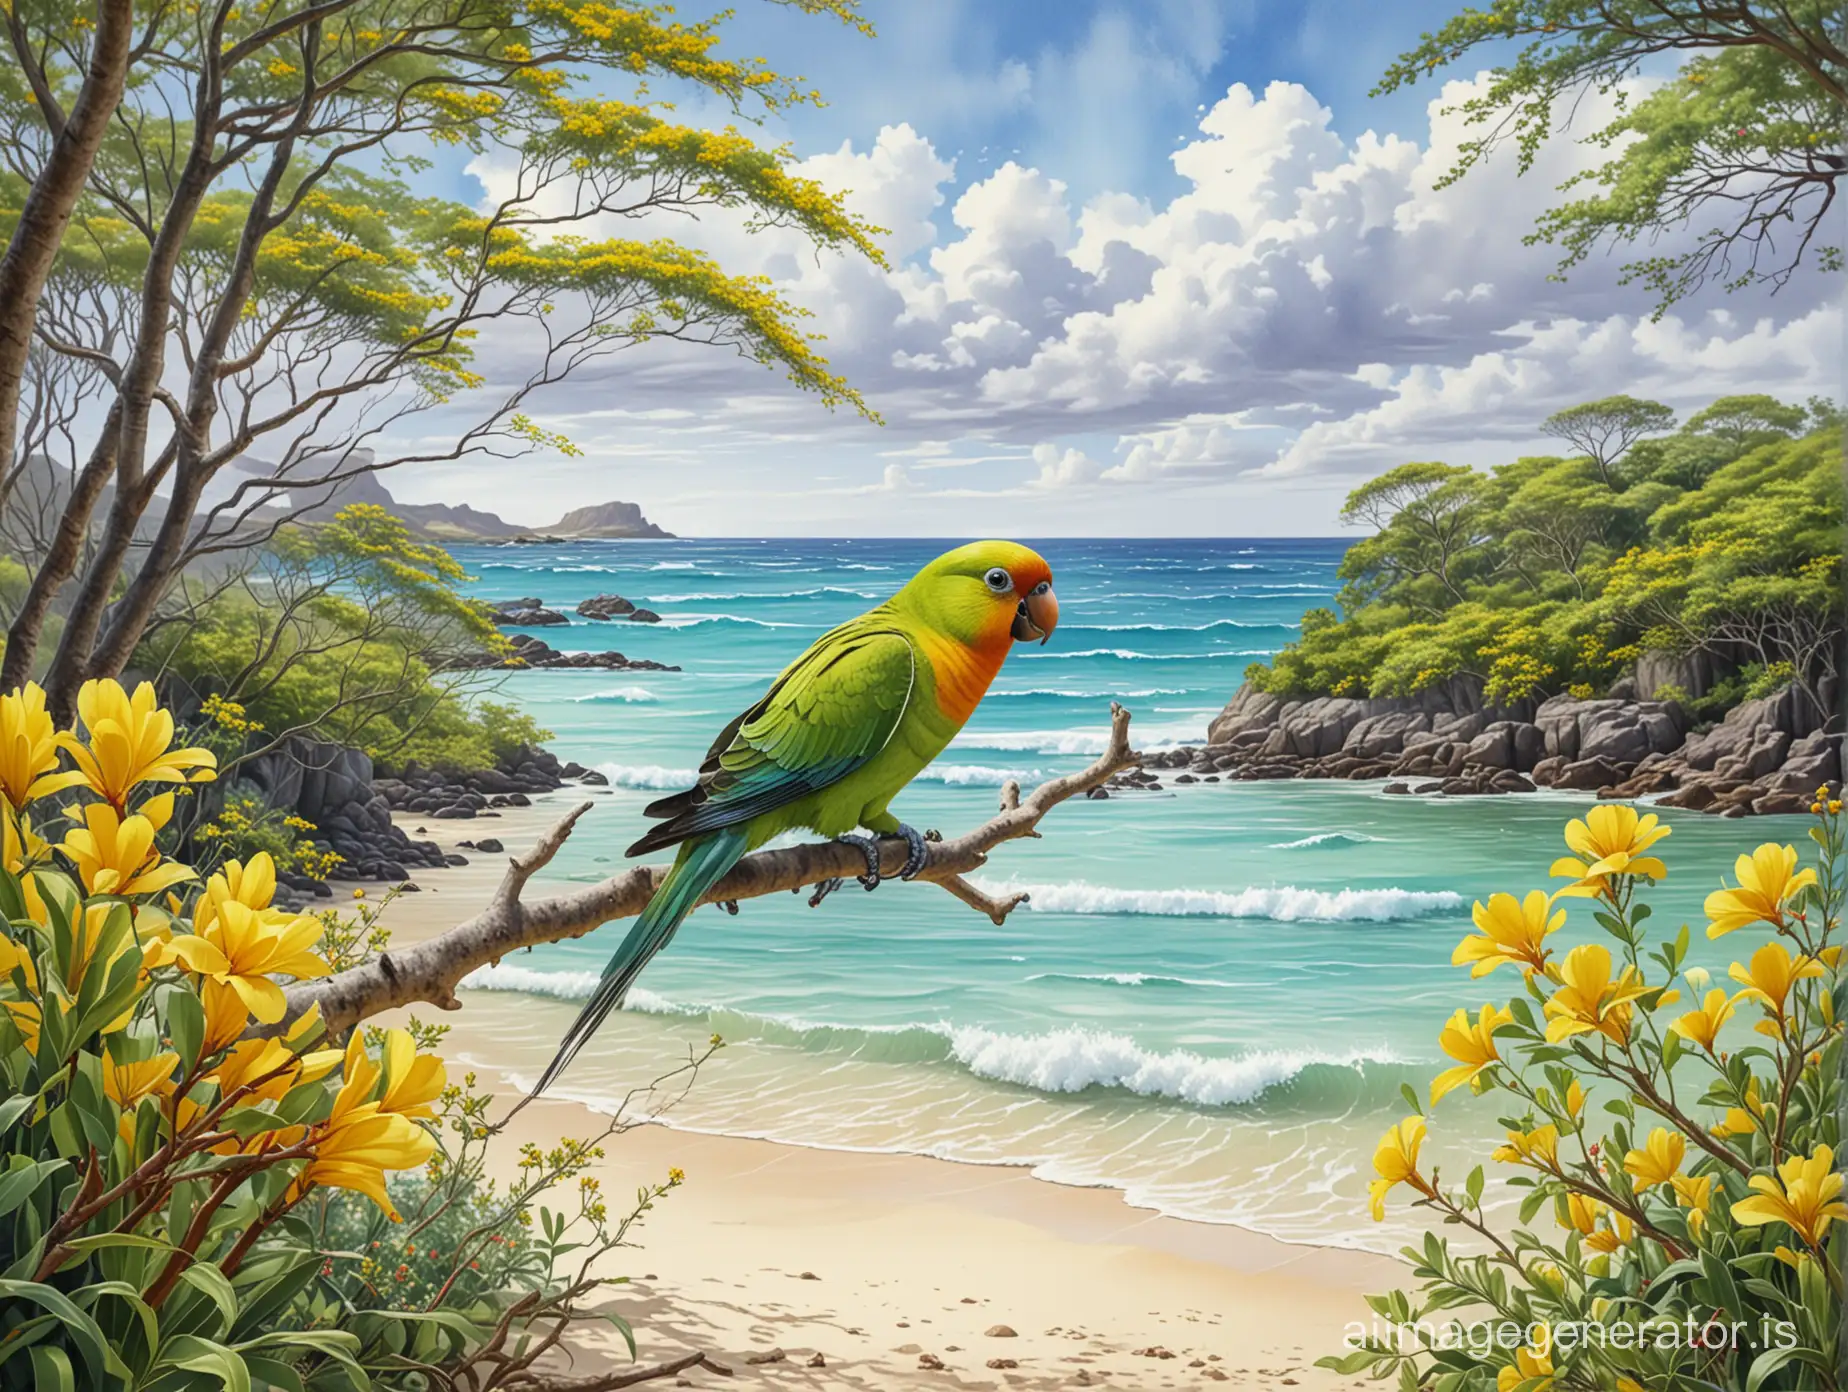 Mauritius-Belle-Mare-Beach-Landscape-with-Echo-Parakeet-Bird-and-Filao-Trees